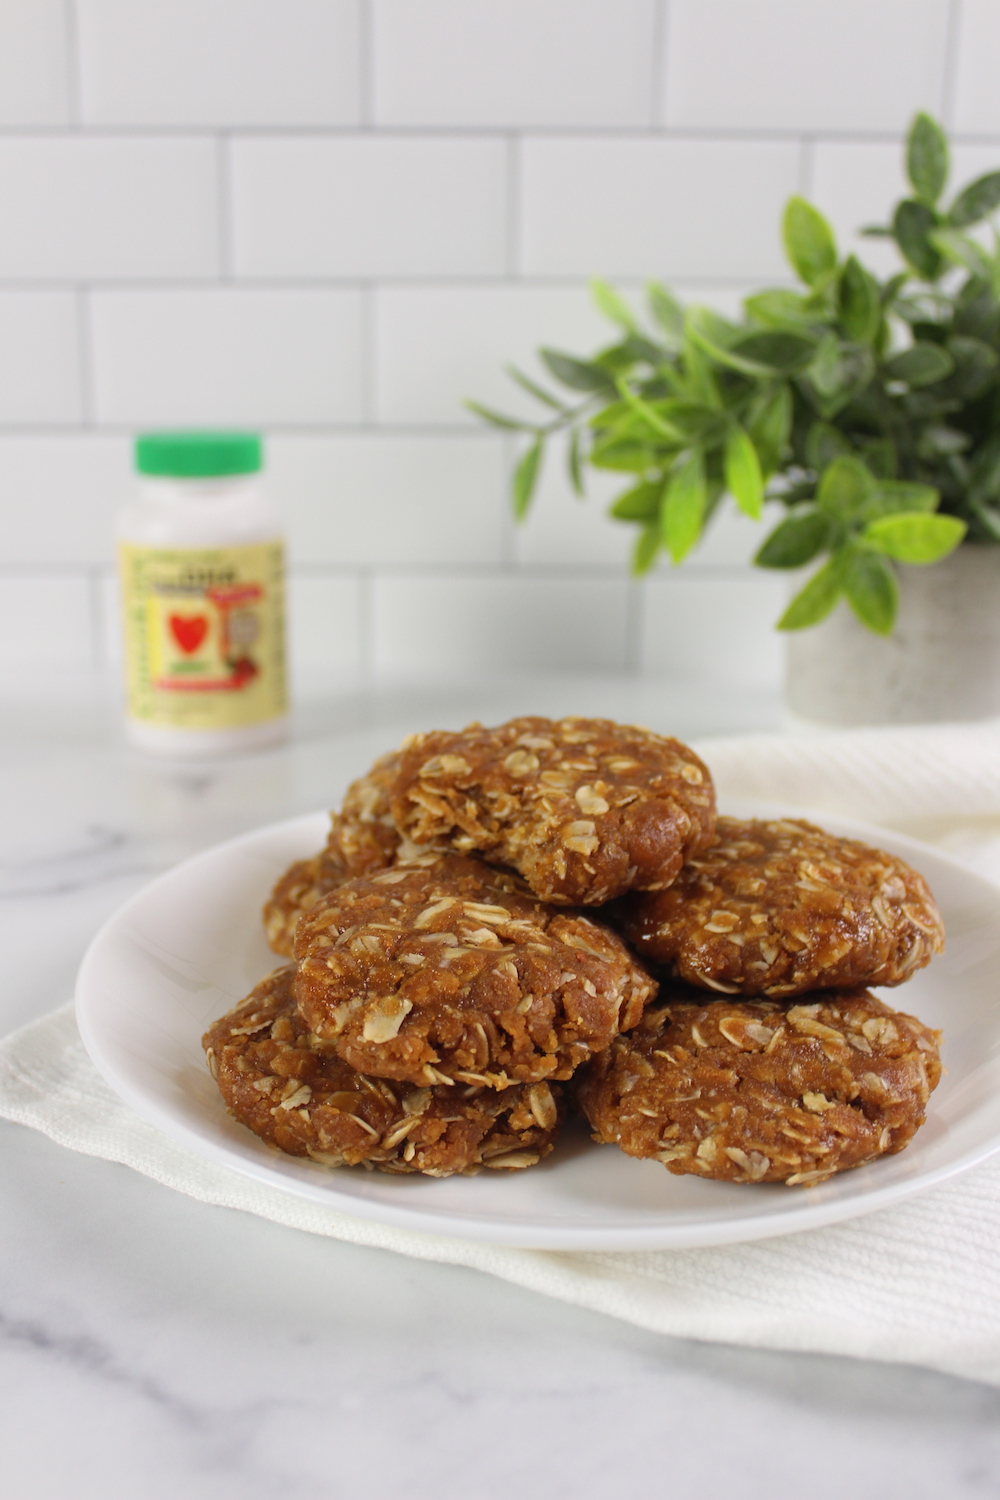 Healthy no bake peanut butter cookies with added vitamins for kids